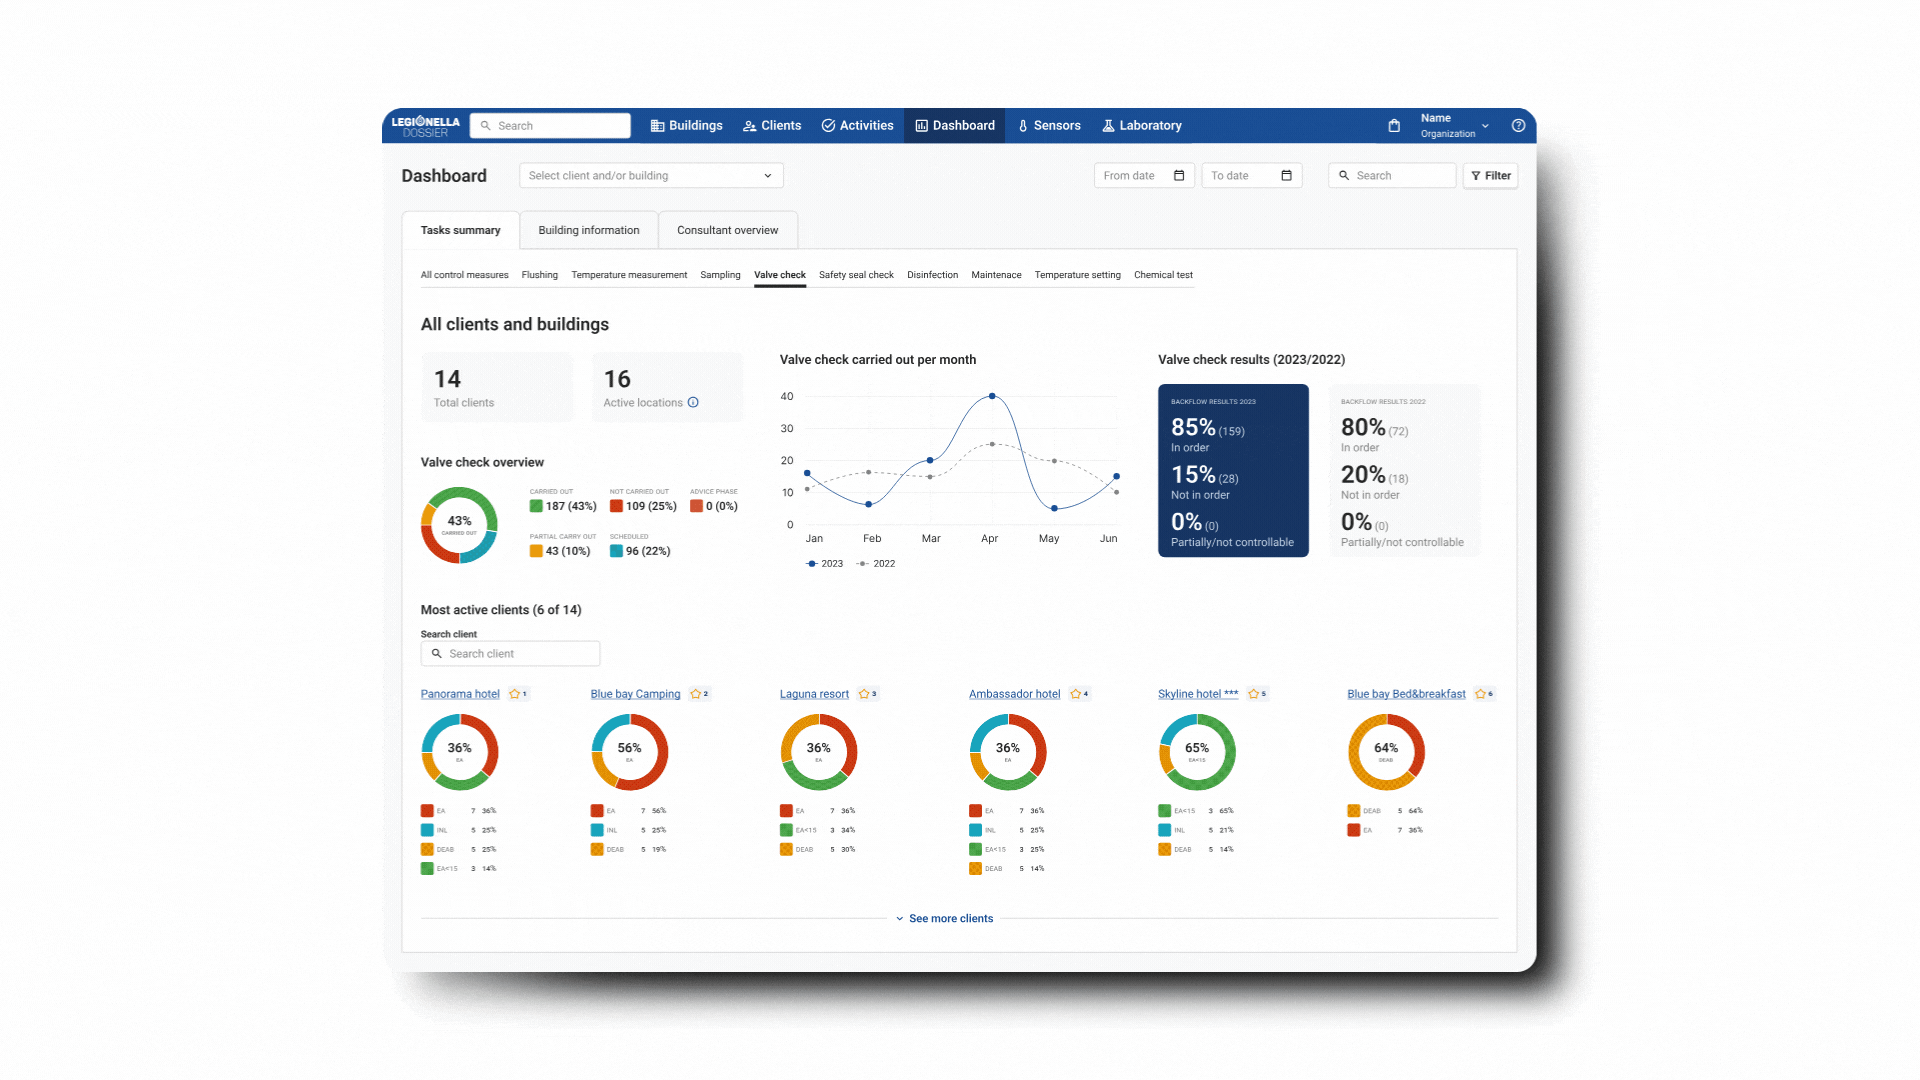 New dashboards LD 1.3 release (3)